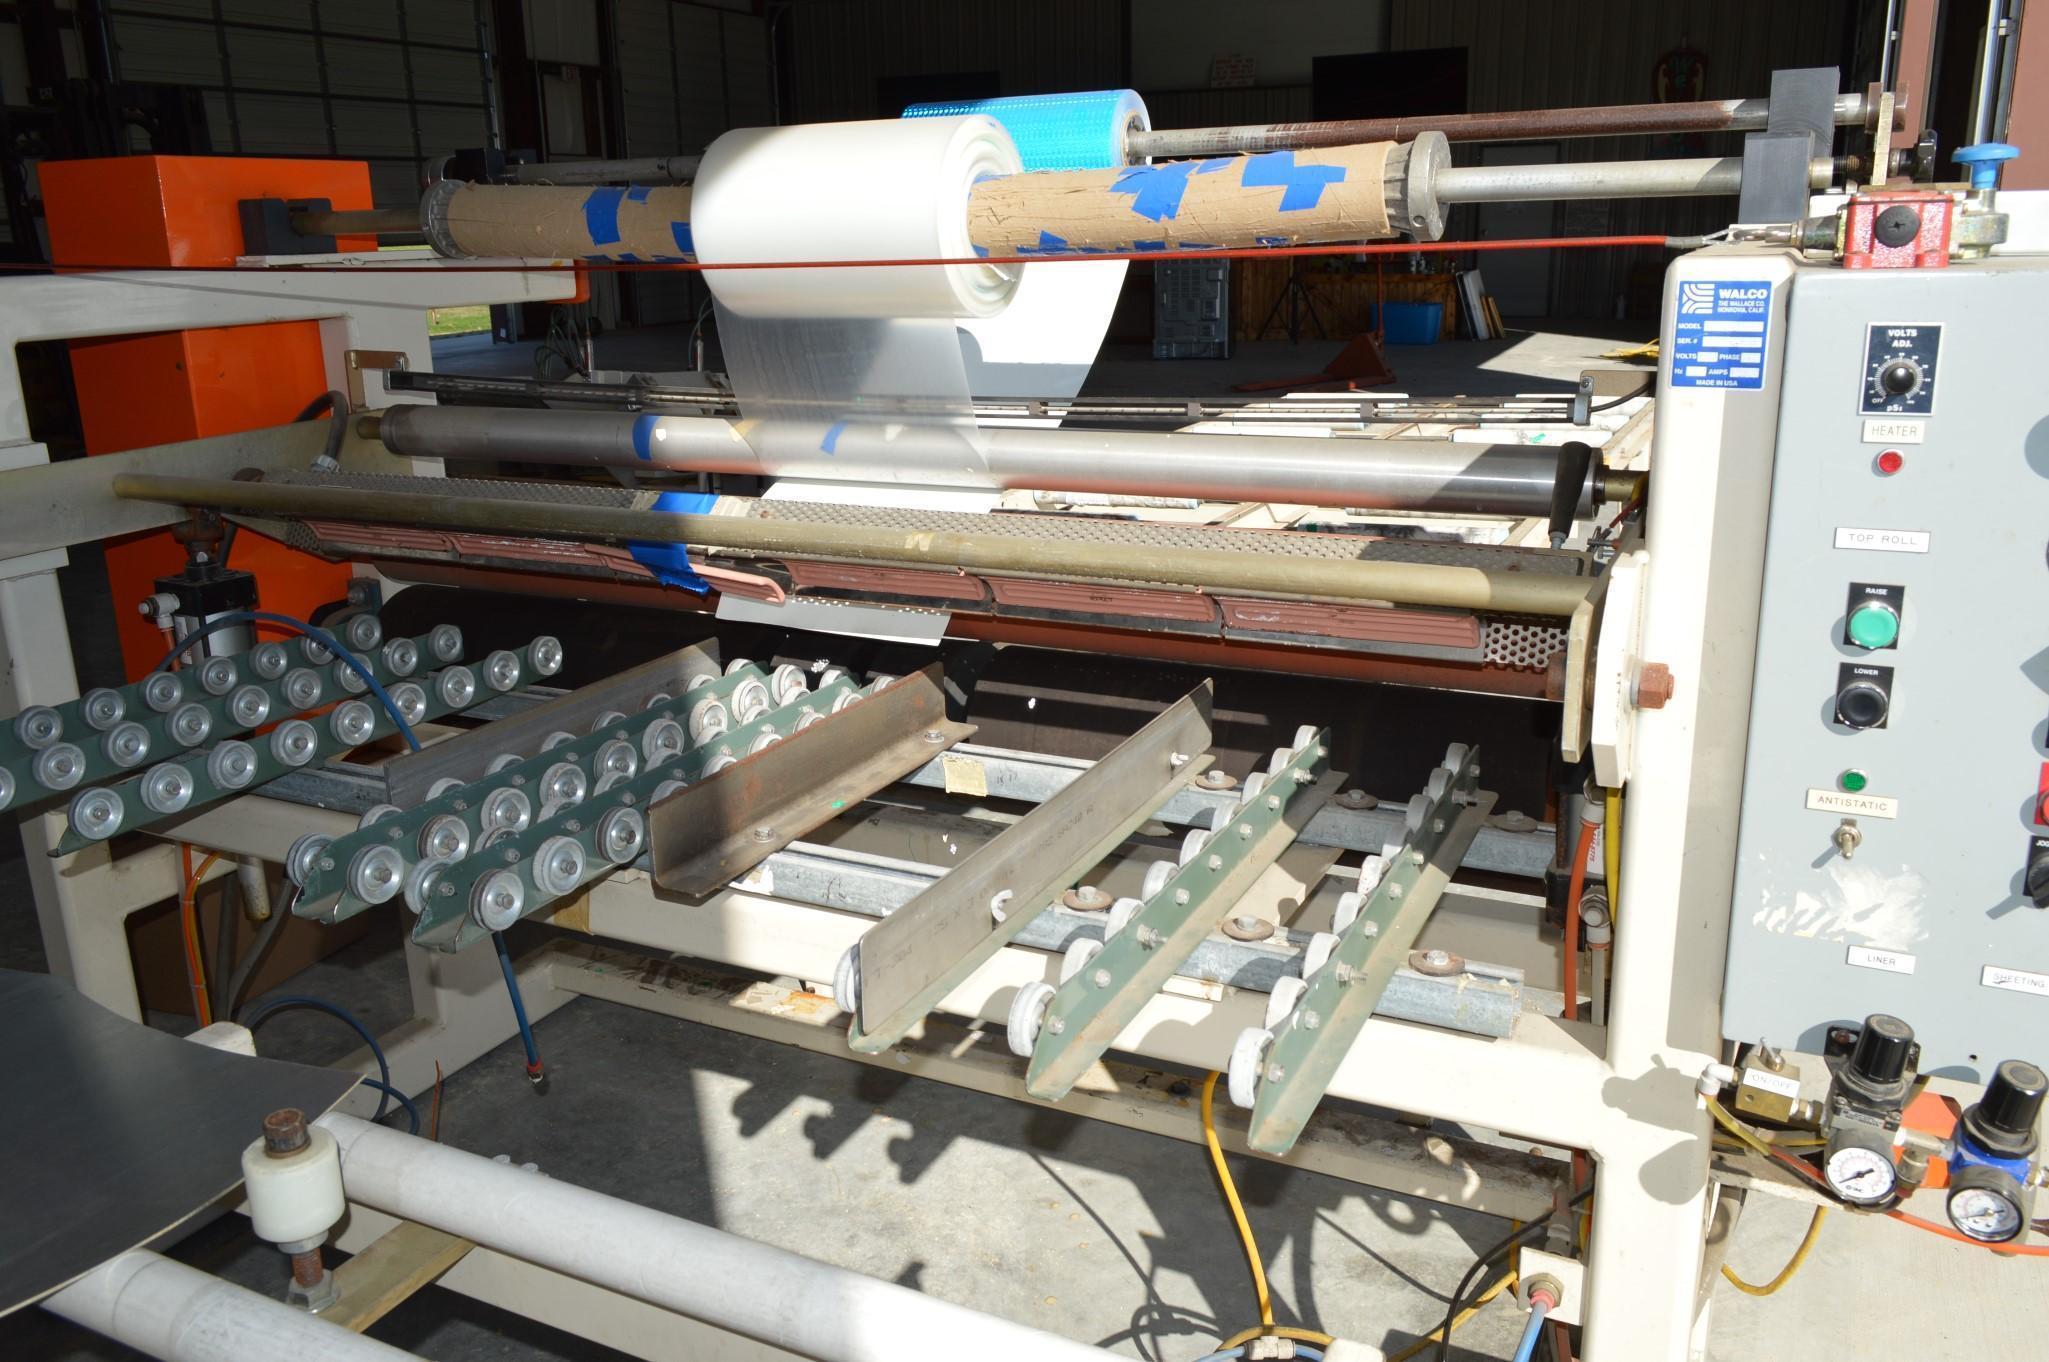 Walco 820-64 Squeeze Roll Applicator w/Extruded Aluminum Adapter - Signs/Signage/Printer/Laminator